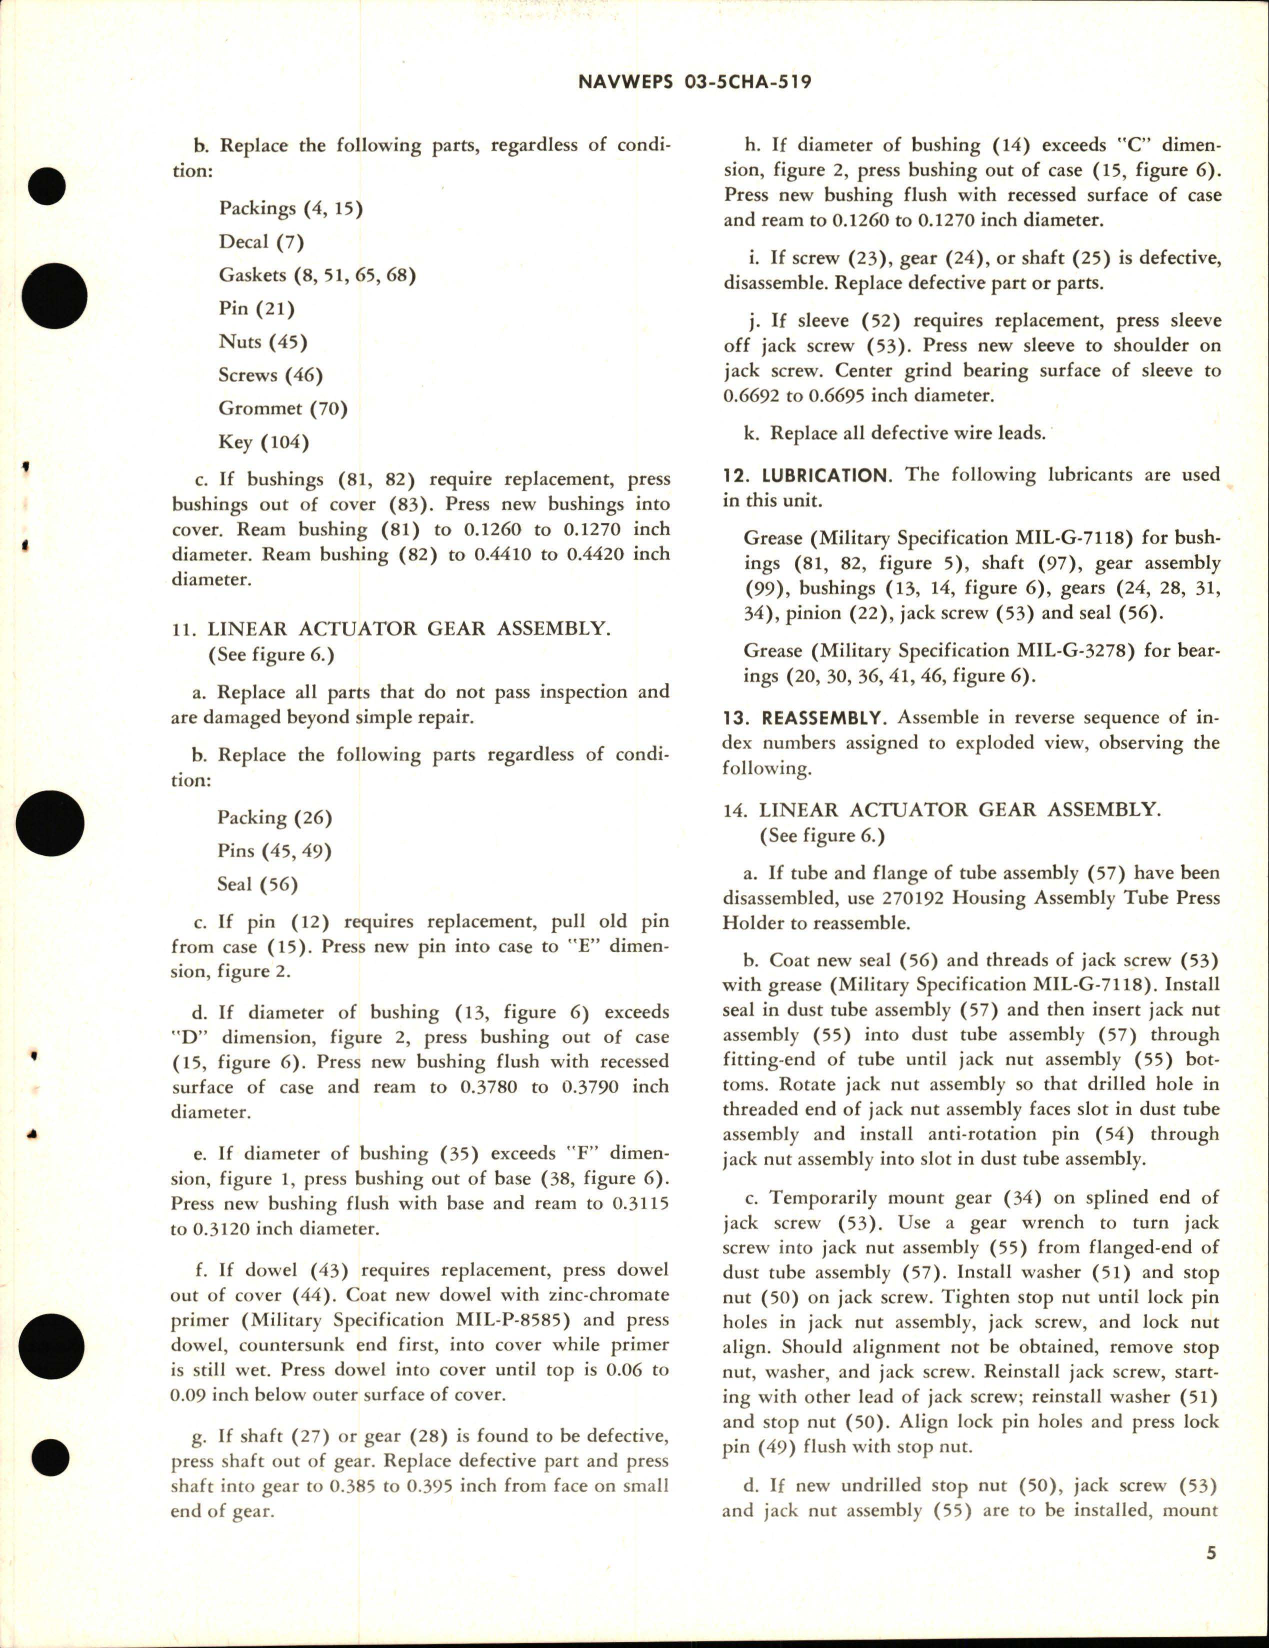 Sample page 5 from AirCorps Library document: Overhaul Instructions with Parts Breakdown for Electromechanical Linear Actuator - Part 34622-1